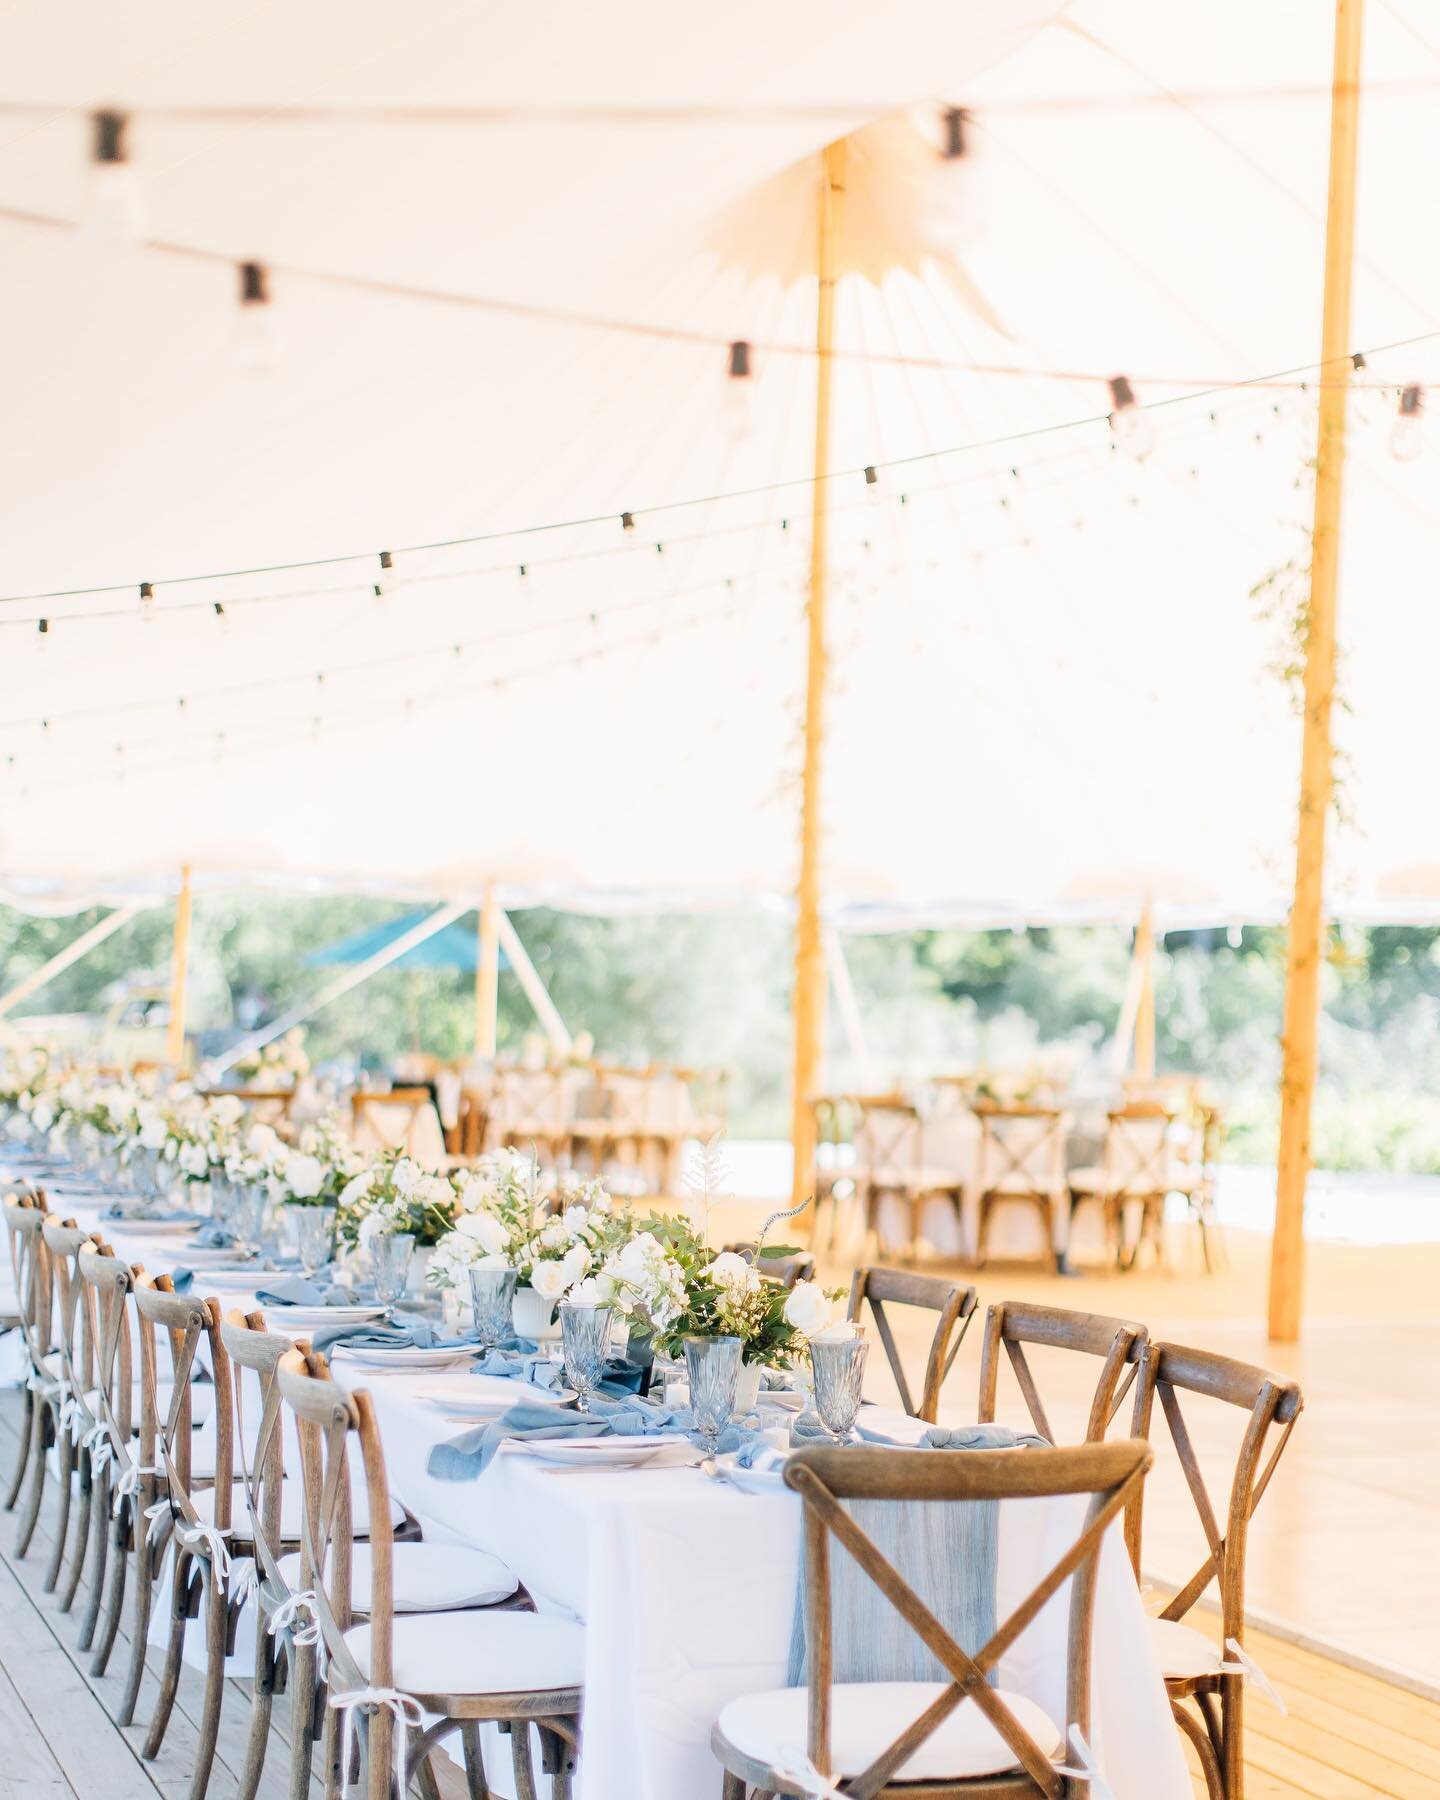 Head table goals! 10 lush centerpieces lined this extra long table with bud jars scattered throughout. Add in this dusty blue palette against the organic green and white florals and the end result is perfection! Captured beautifully by @nidyalloydpho